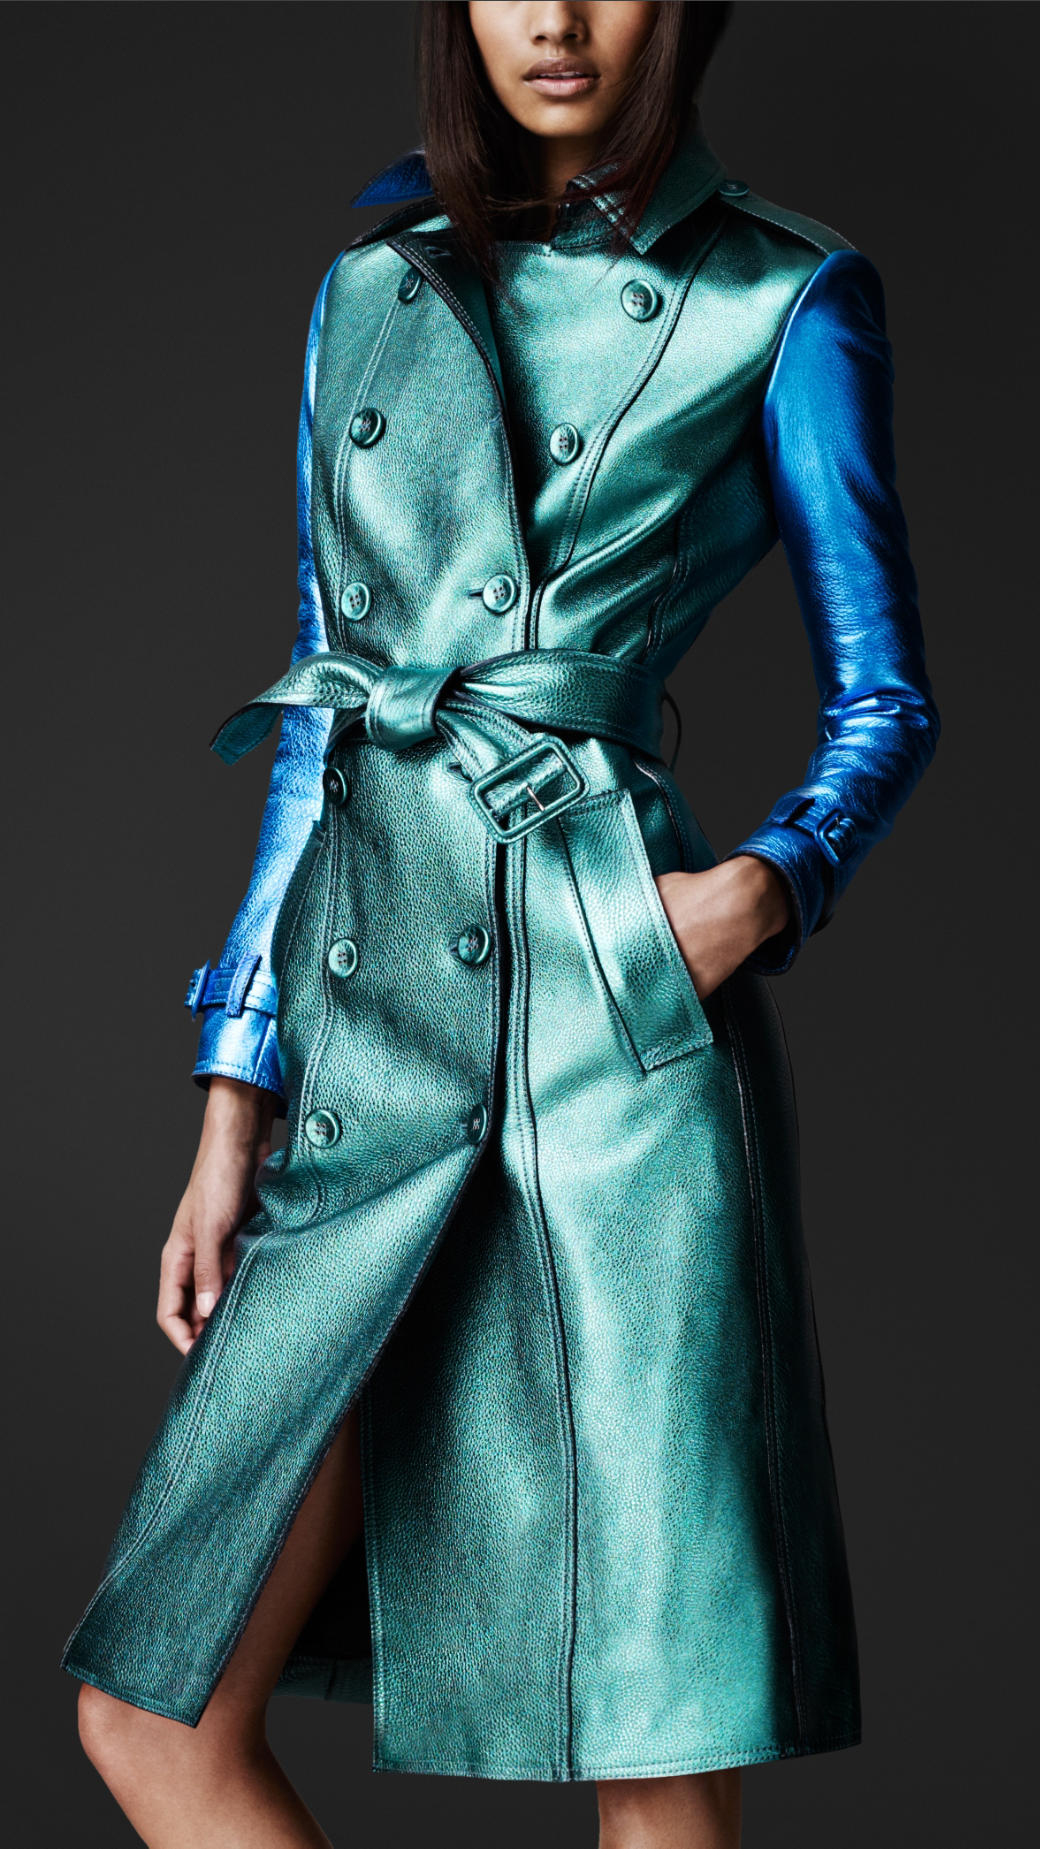 Burberry prorsum Metallic Leather Trench Coat in Blue (green) | Lyst